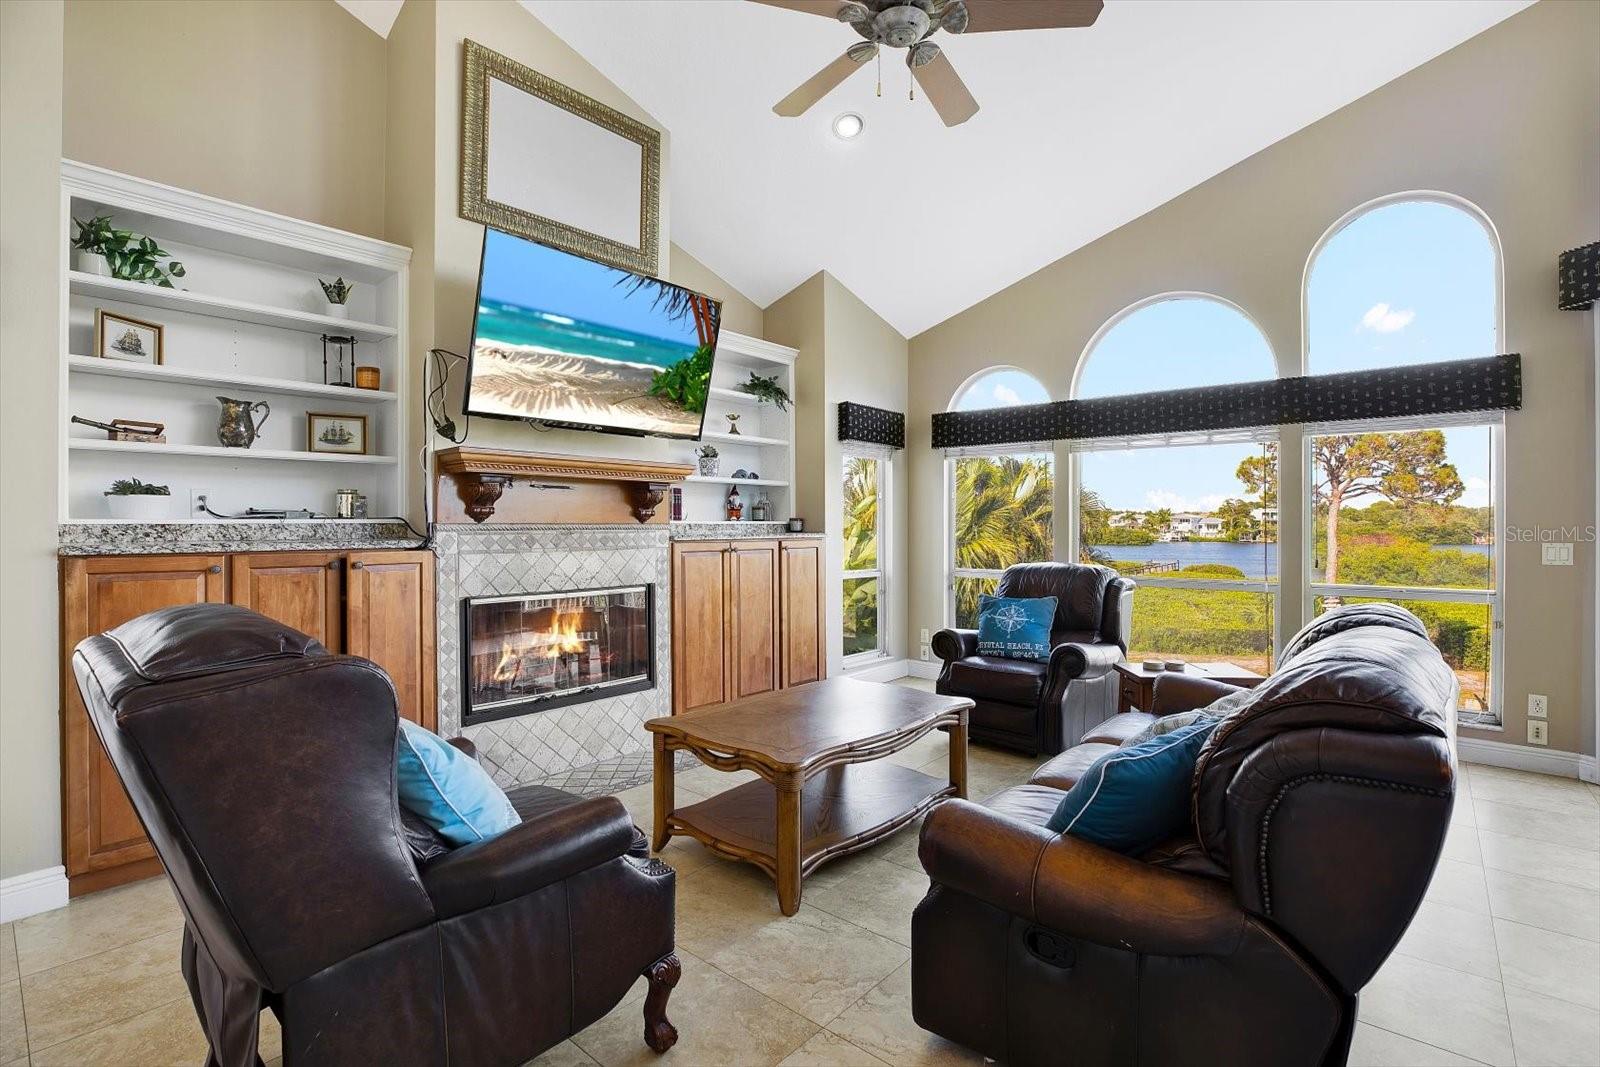 For when you want to do something other than bird watching! Sit back and relax in this spacious family room